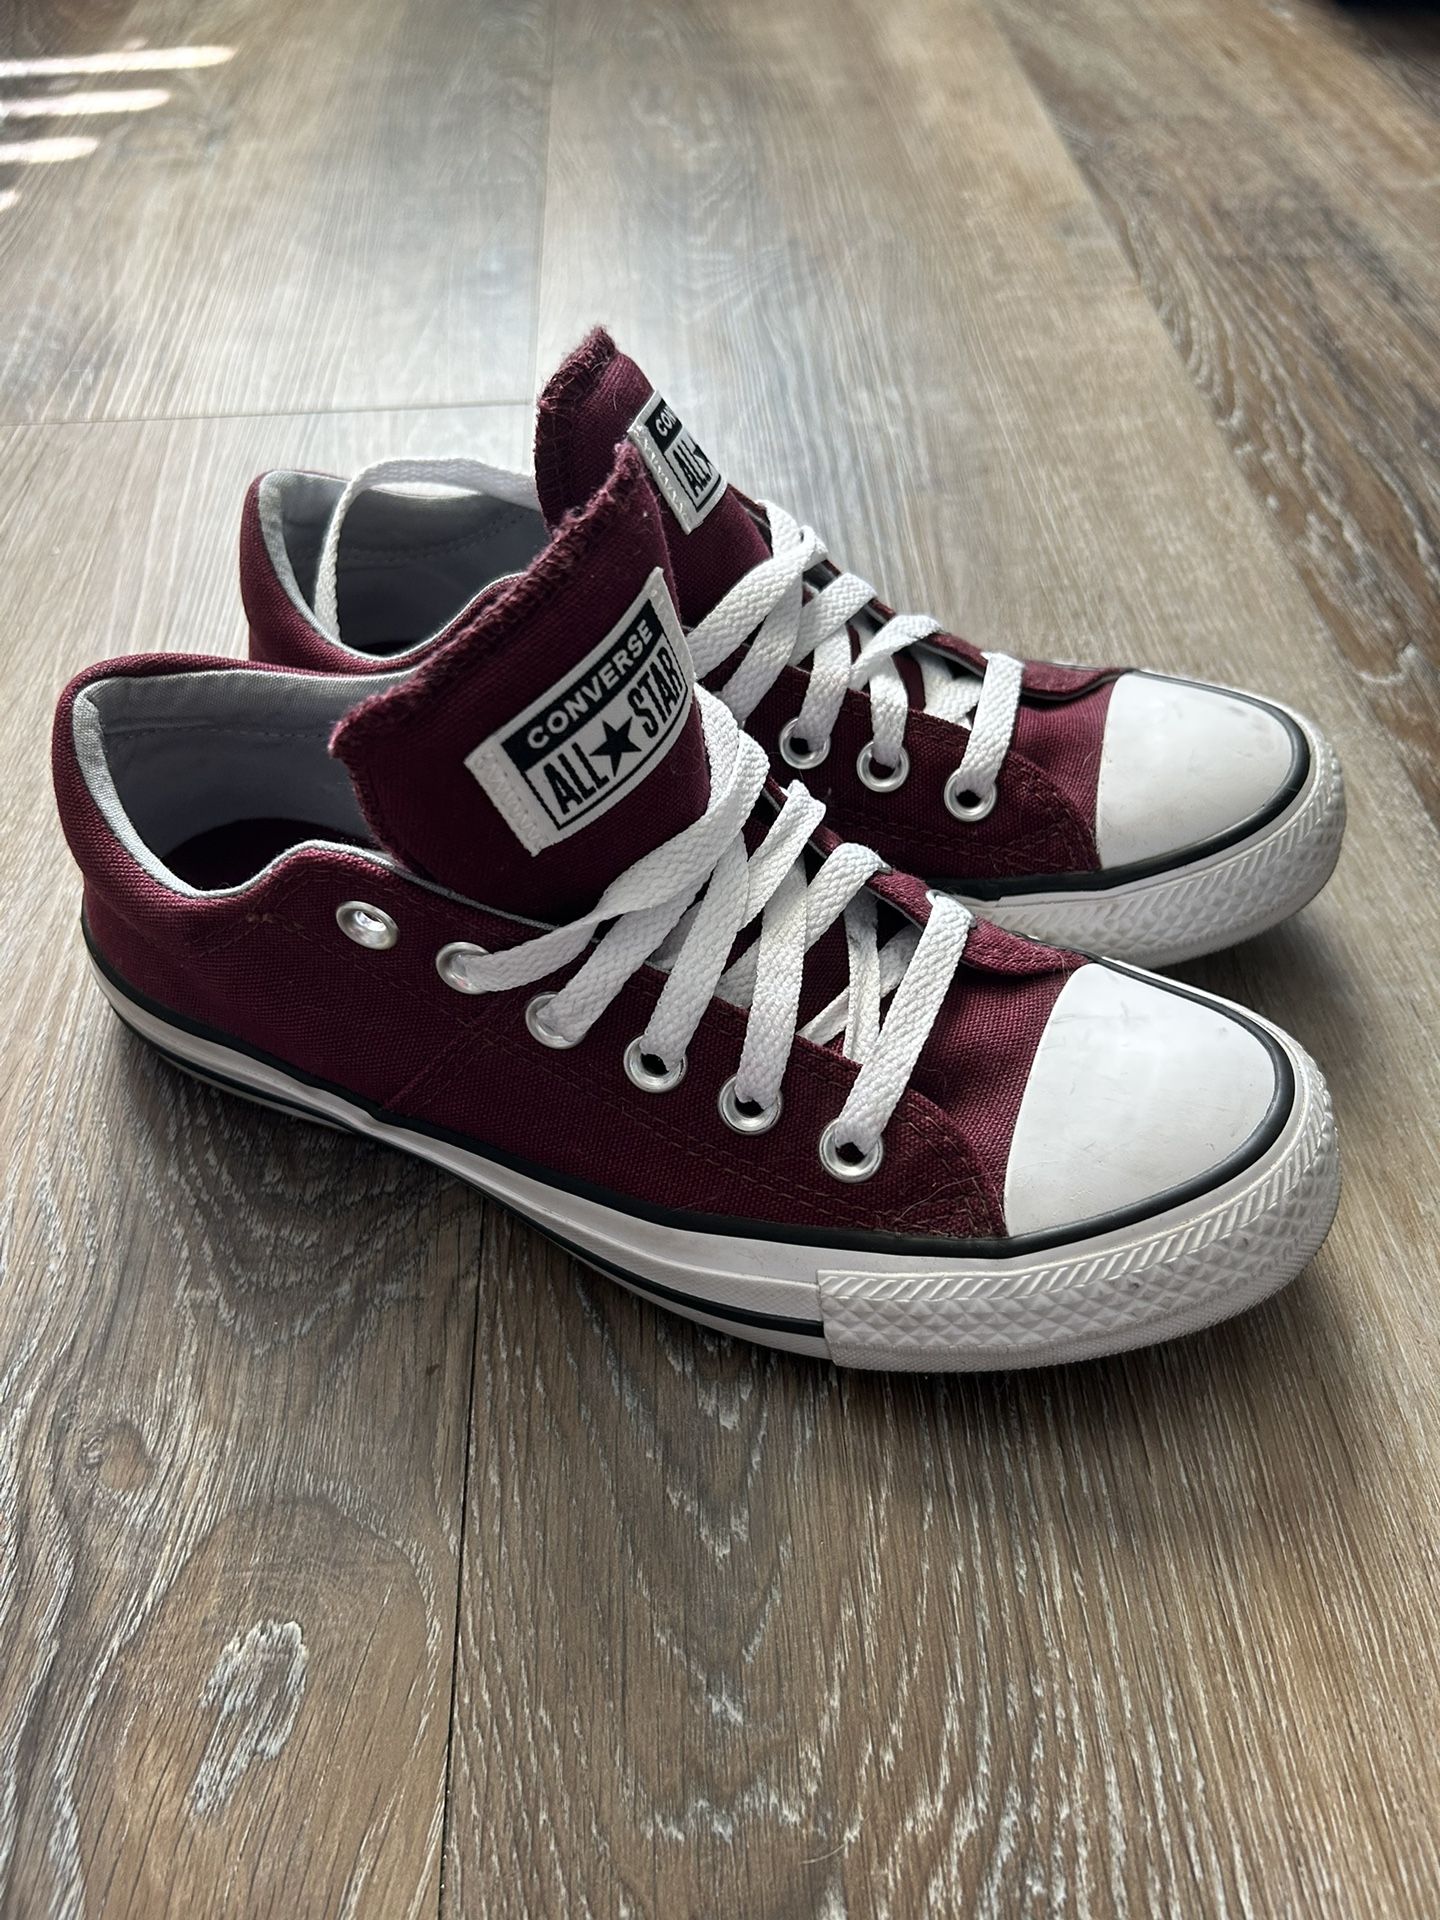 Converse Chuck Taylor All Star Low Top Shoes - 7-Women - Burgundy / Wine